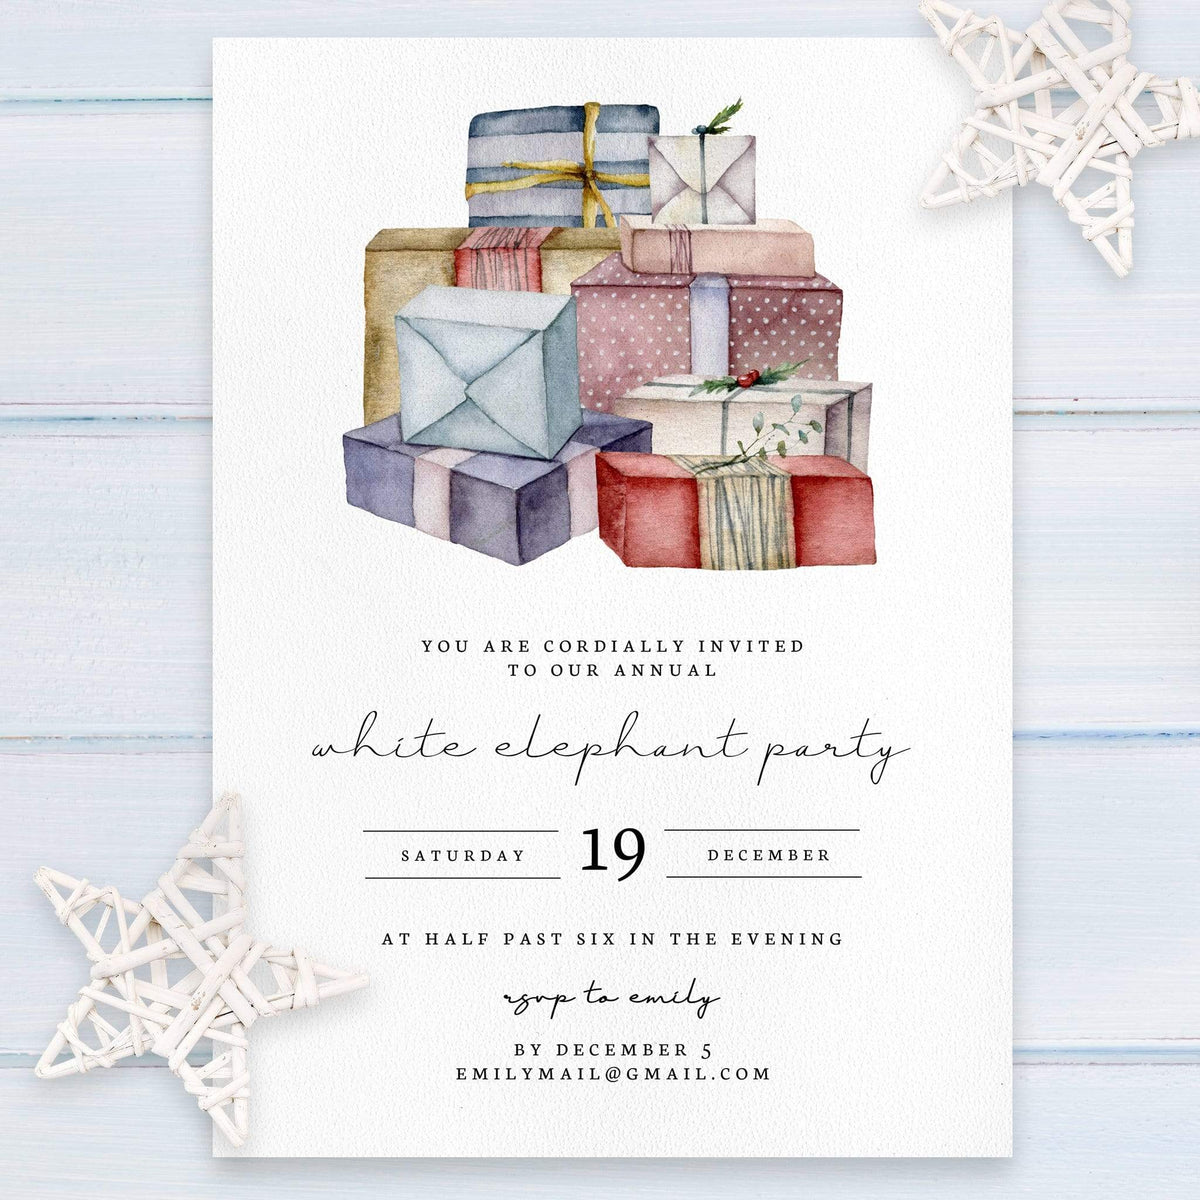 White Elephant Party Template Set, Gift Exchange Party Invitation, Holiday  Party Template Set, Christmas Party Invite Instant Download, Edit 